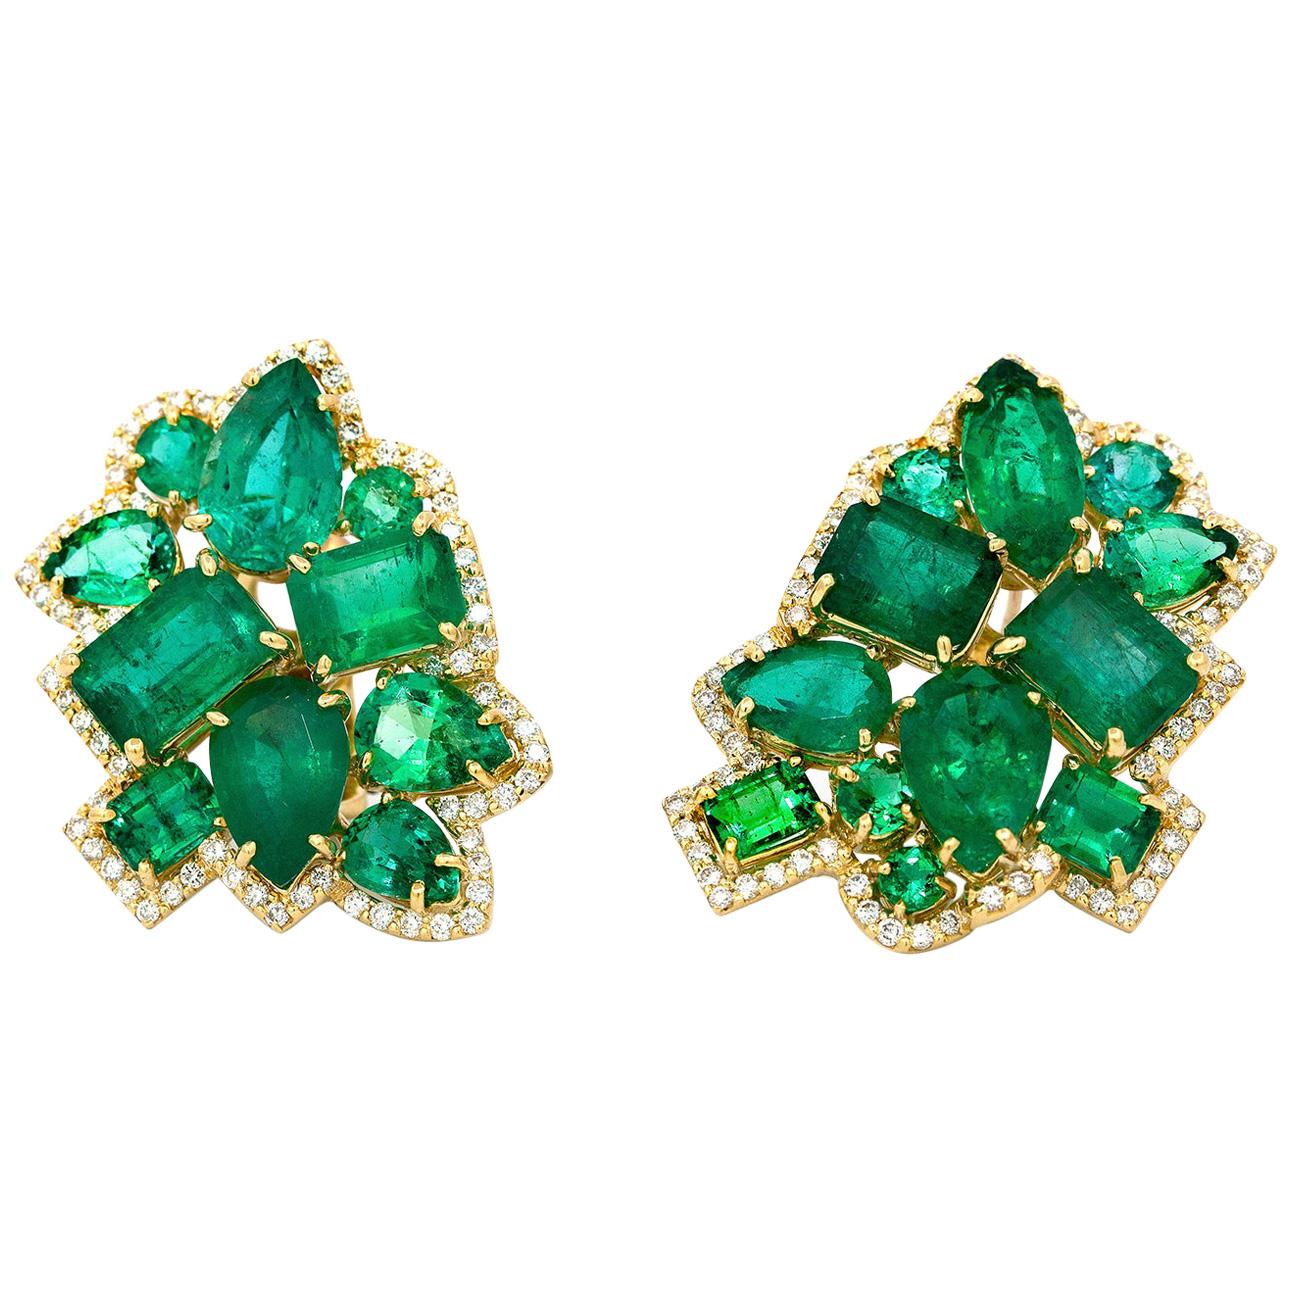 Vintage Emeralds, Set in a Modern Classic 18 Karat Gold French Clip Earrings